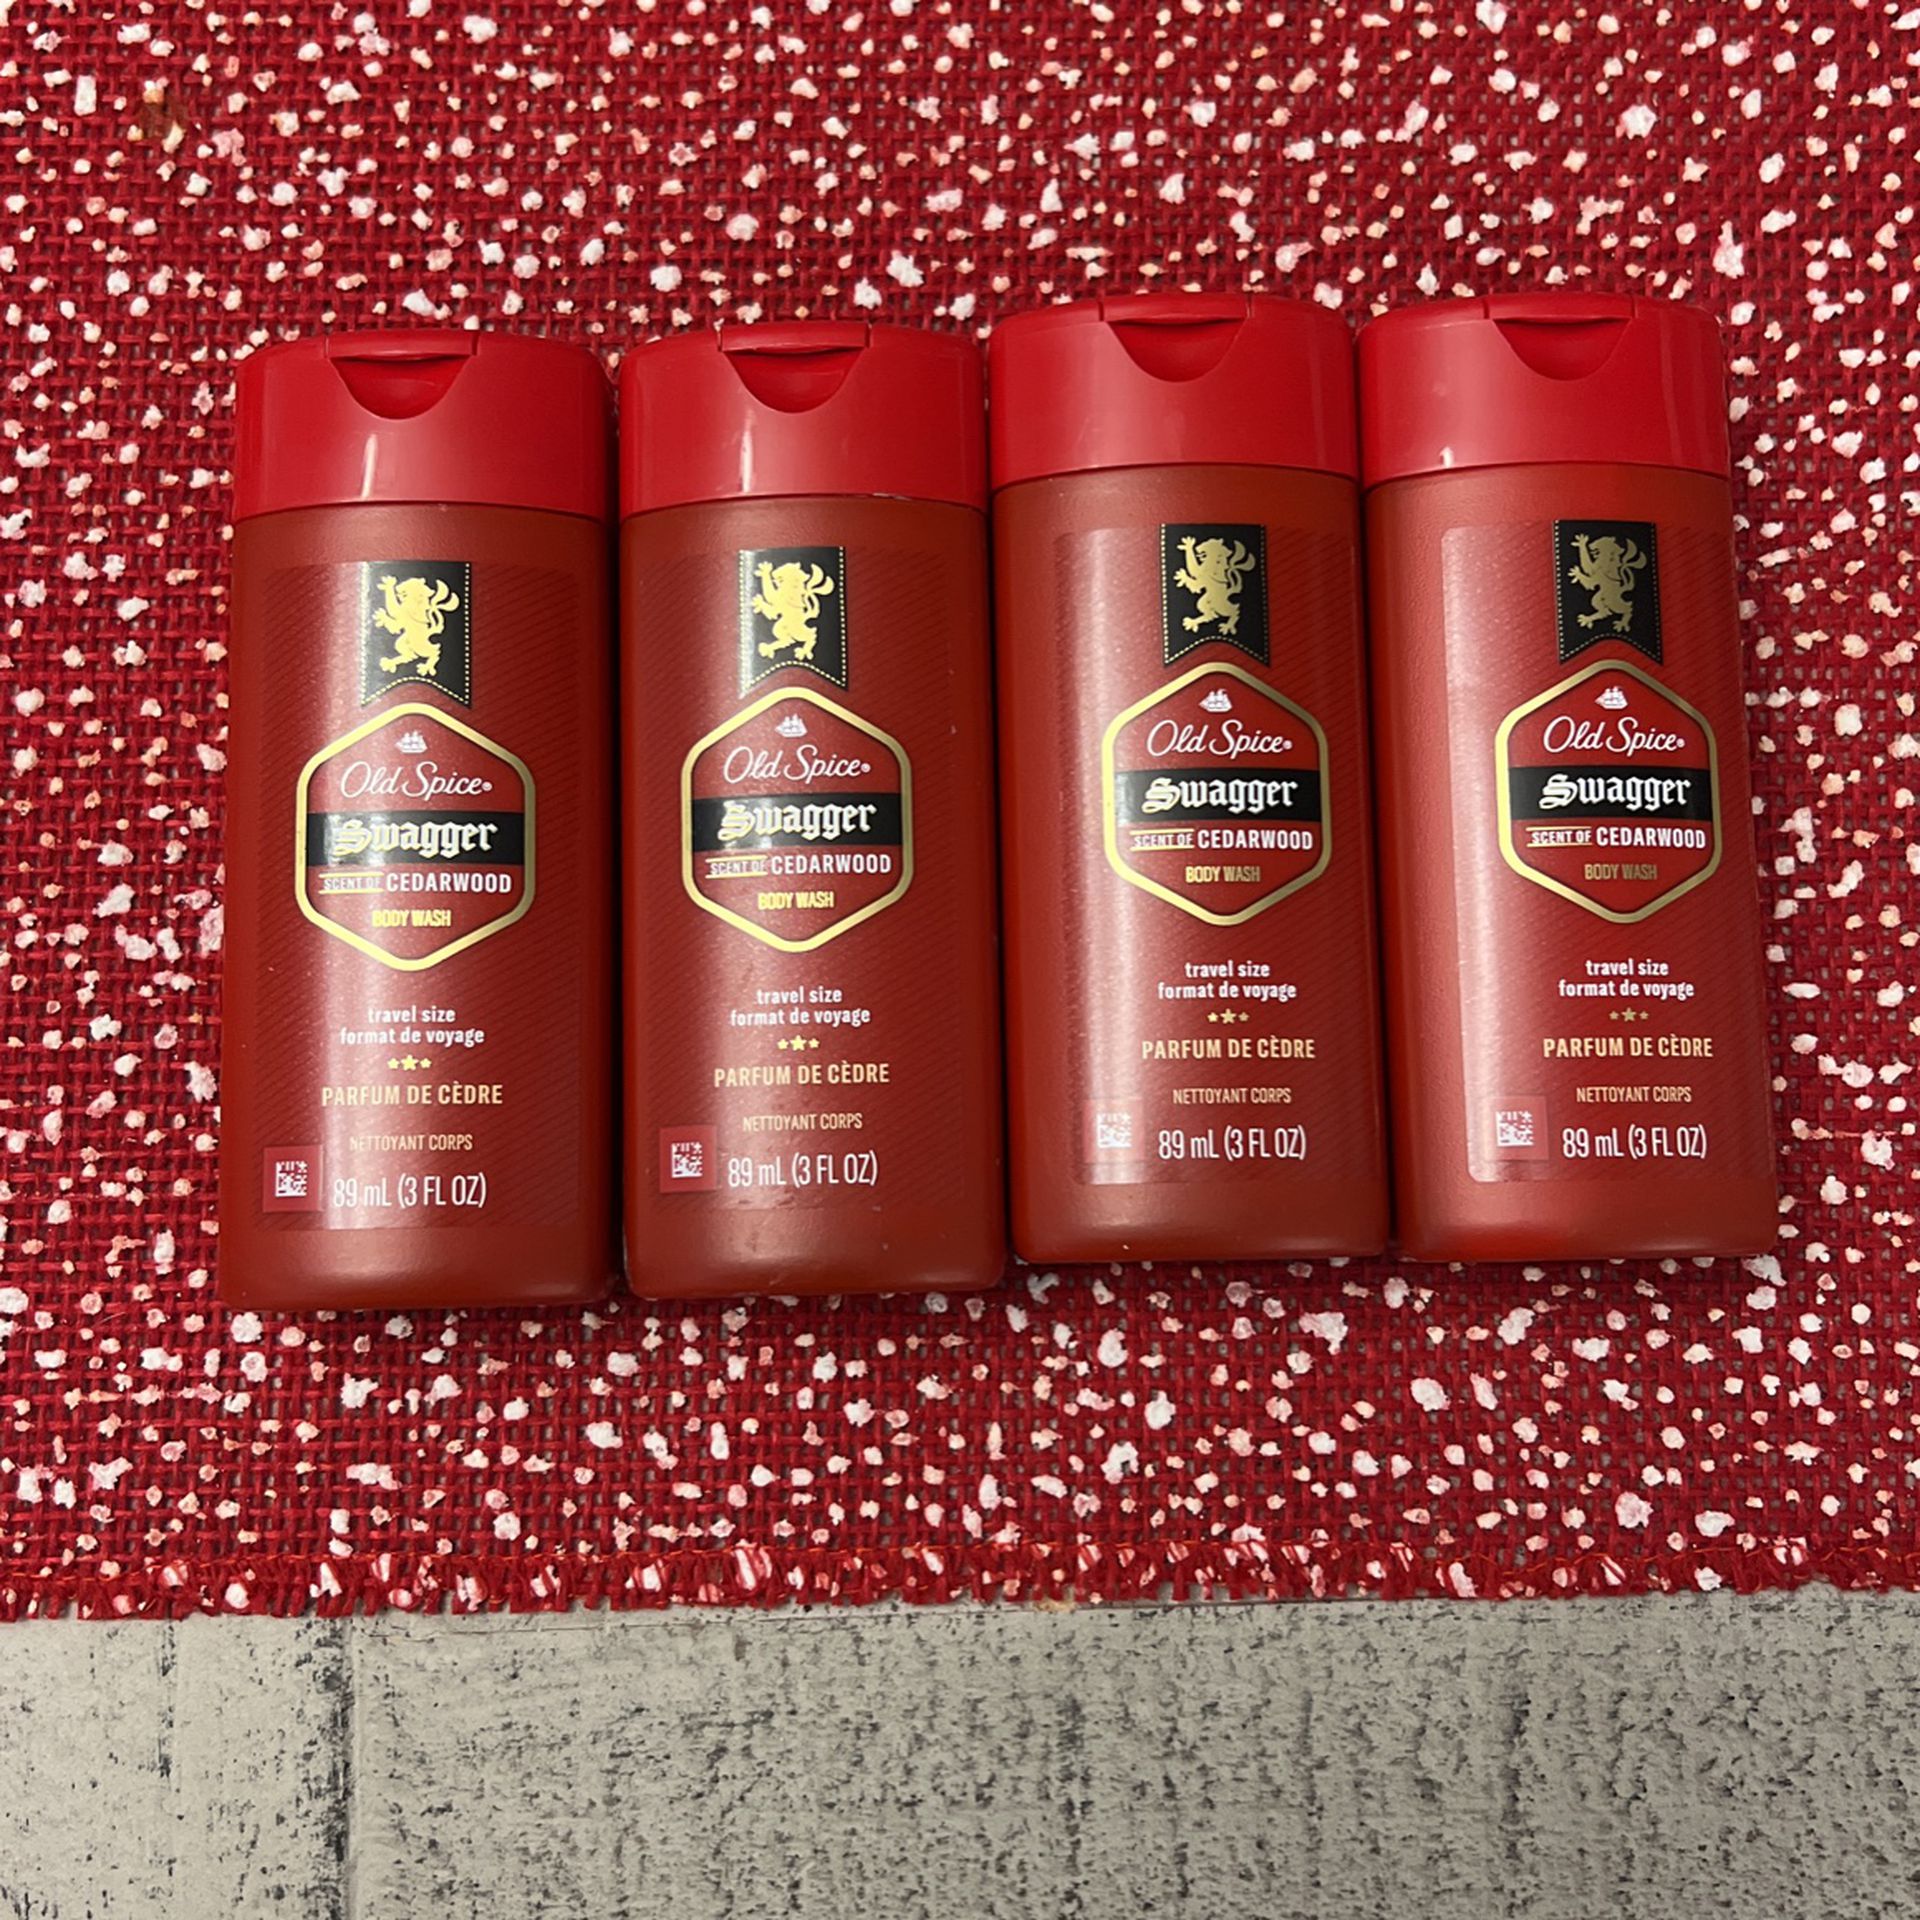 4 - Old Spice Red Zone Swagger Body Wash, Scent of Confidence, 3 fl oz